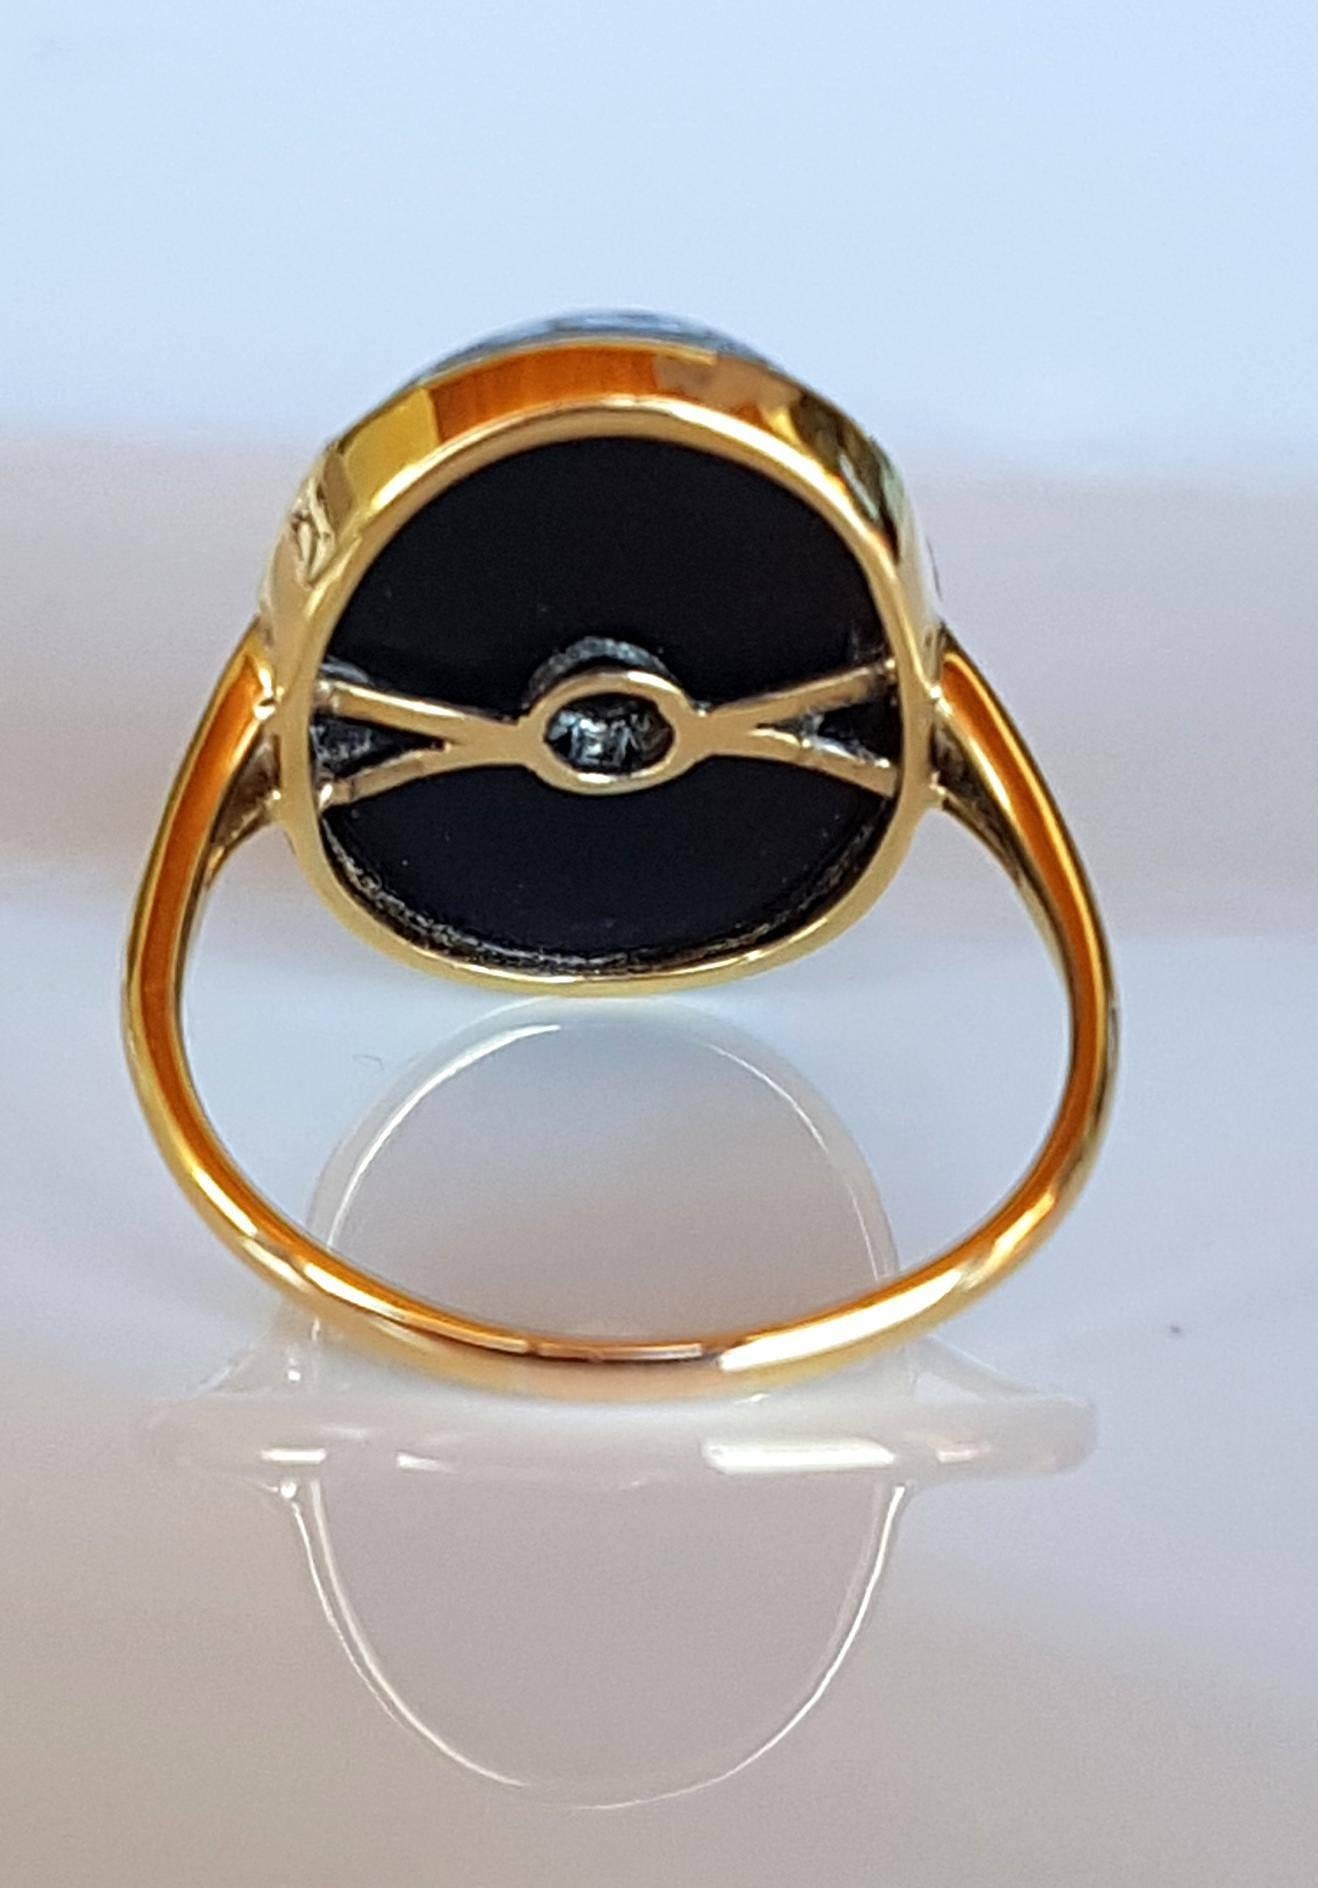 Gorgeous oval banded agate ring set with a centre diamond in 18ct gold. Currently size L (US=5 1/2) and will be safely sized by our expert jewellers free of charge if required. Banded Agate, English, circa 1900.